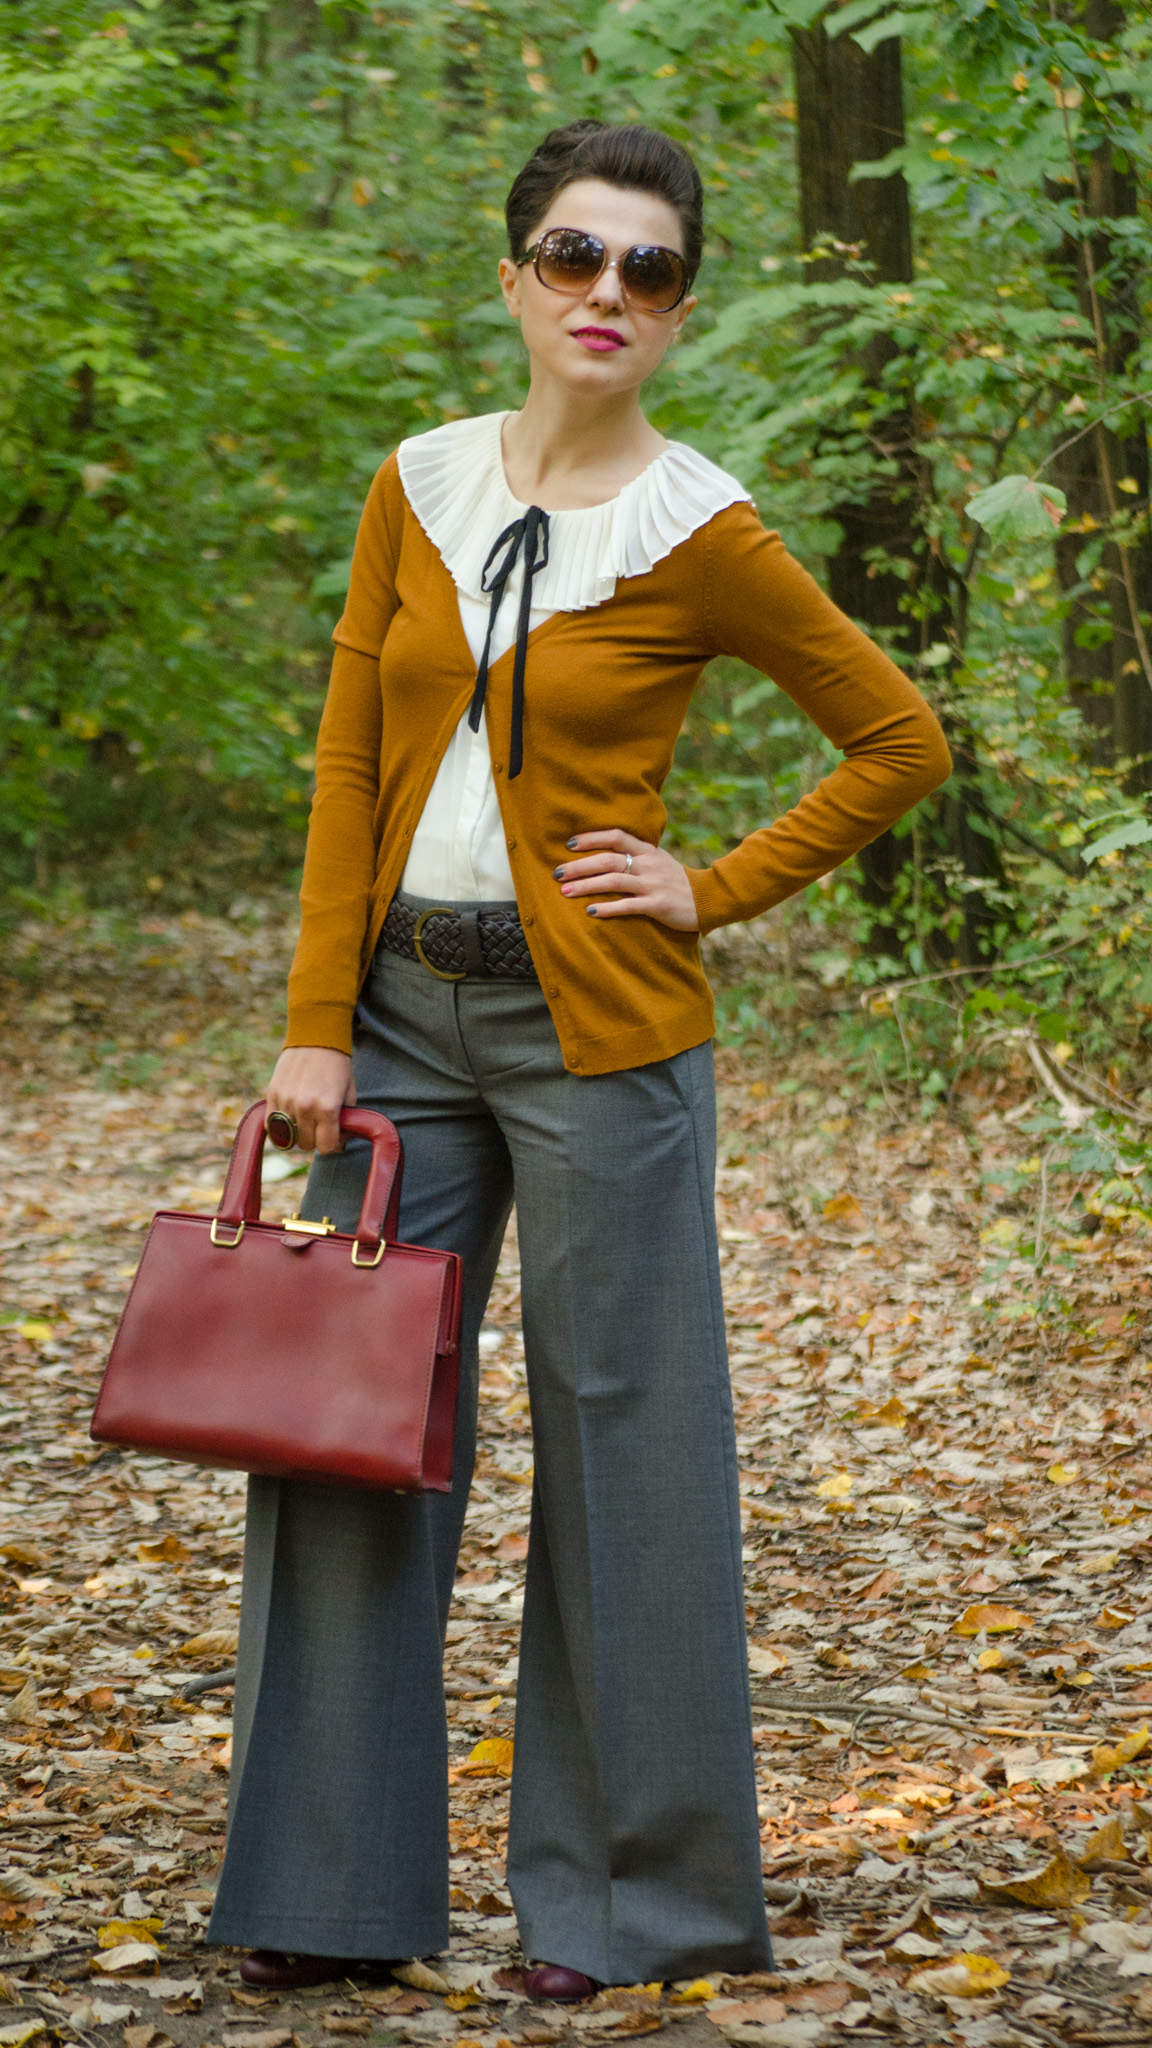 grey flare pants peter pan collar ivoire shirt black bow tie burgundy bag autumn outfit forest cardigan